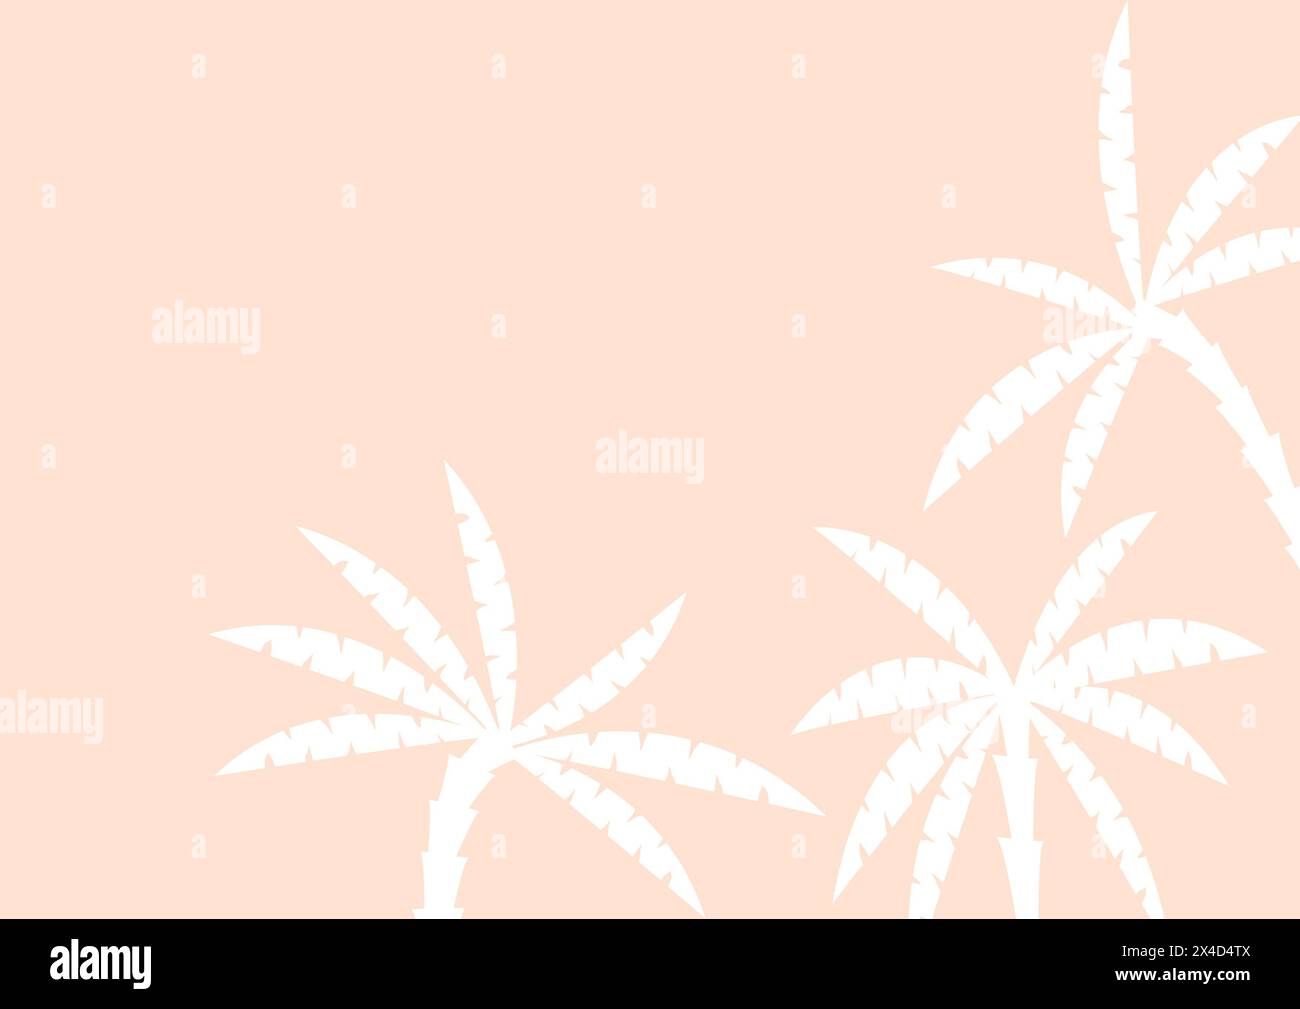 Illustrative background, With peach colors and palm trees. Stock Photo